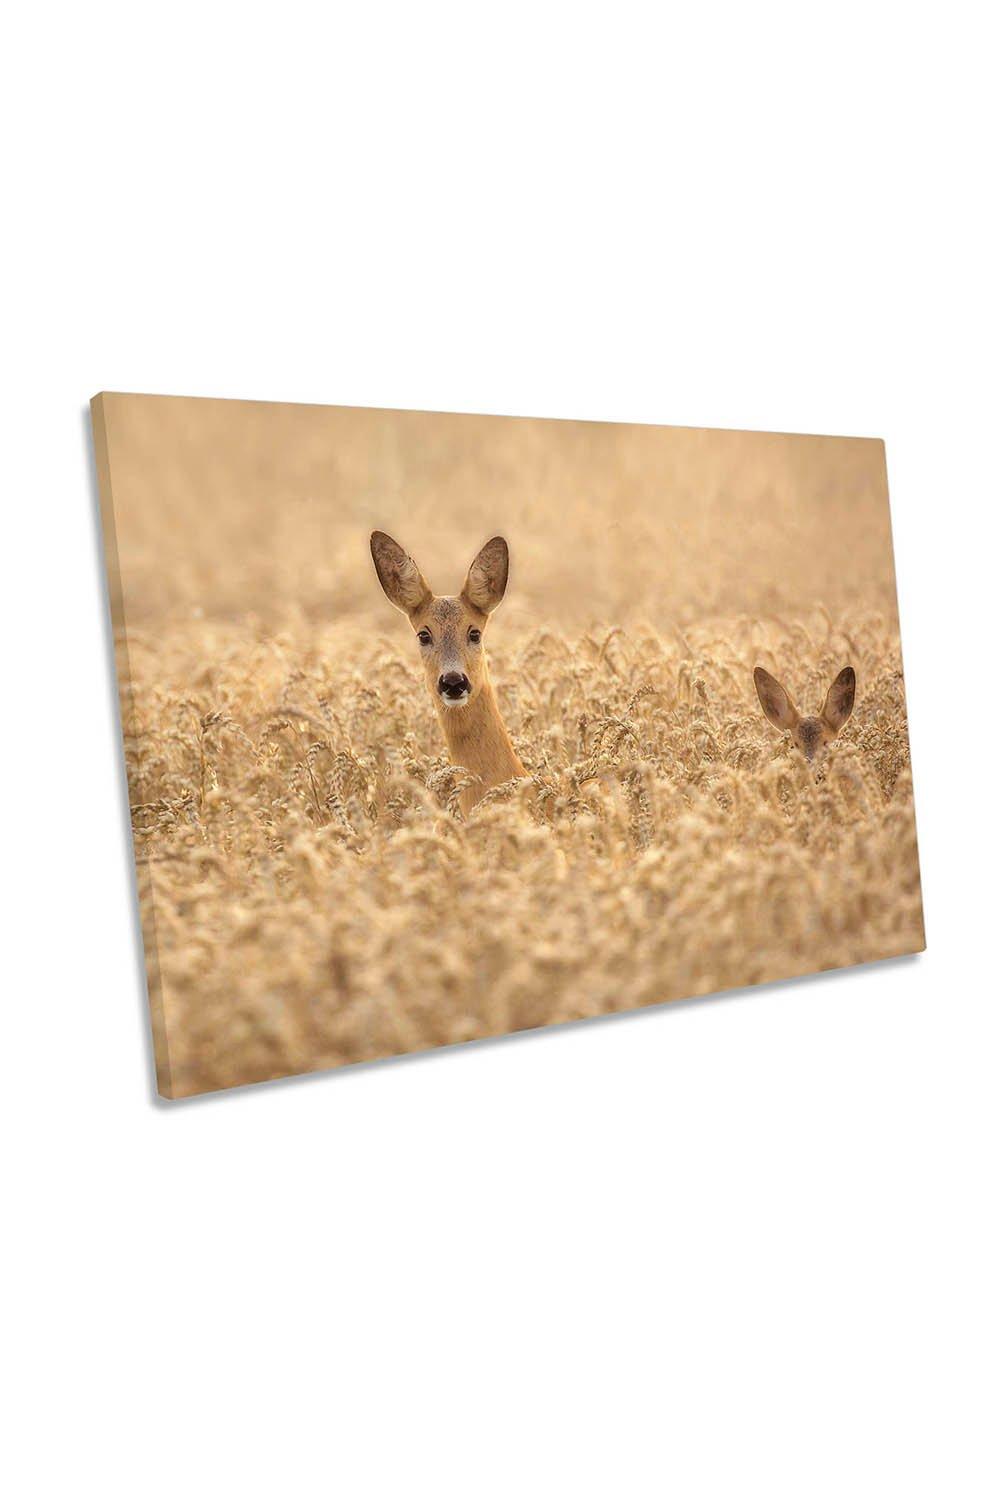 Mother with Child Deer Wildlife Canvas Wall Art Picture Print